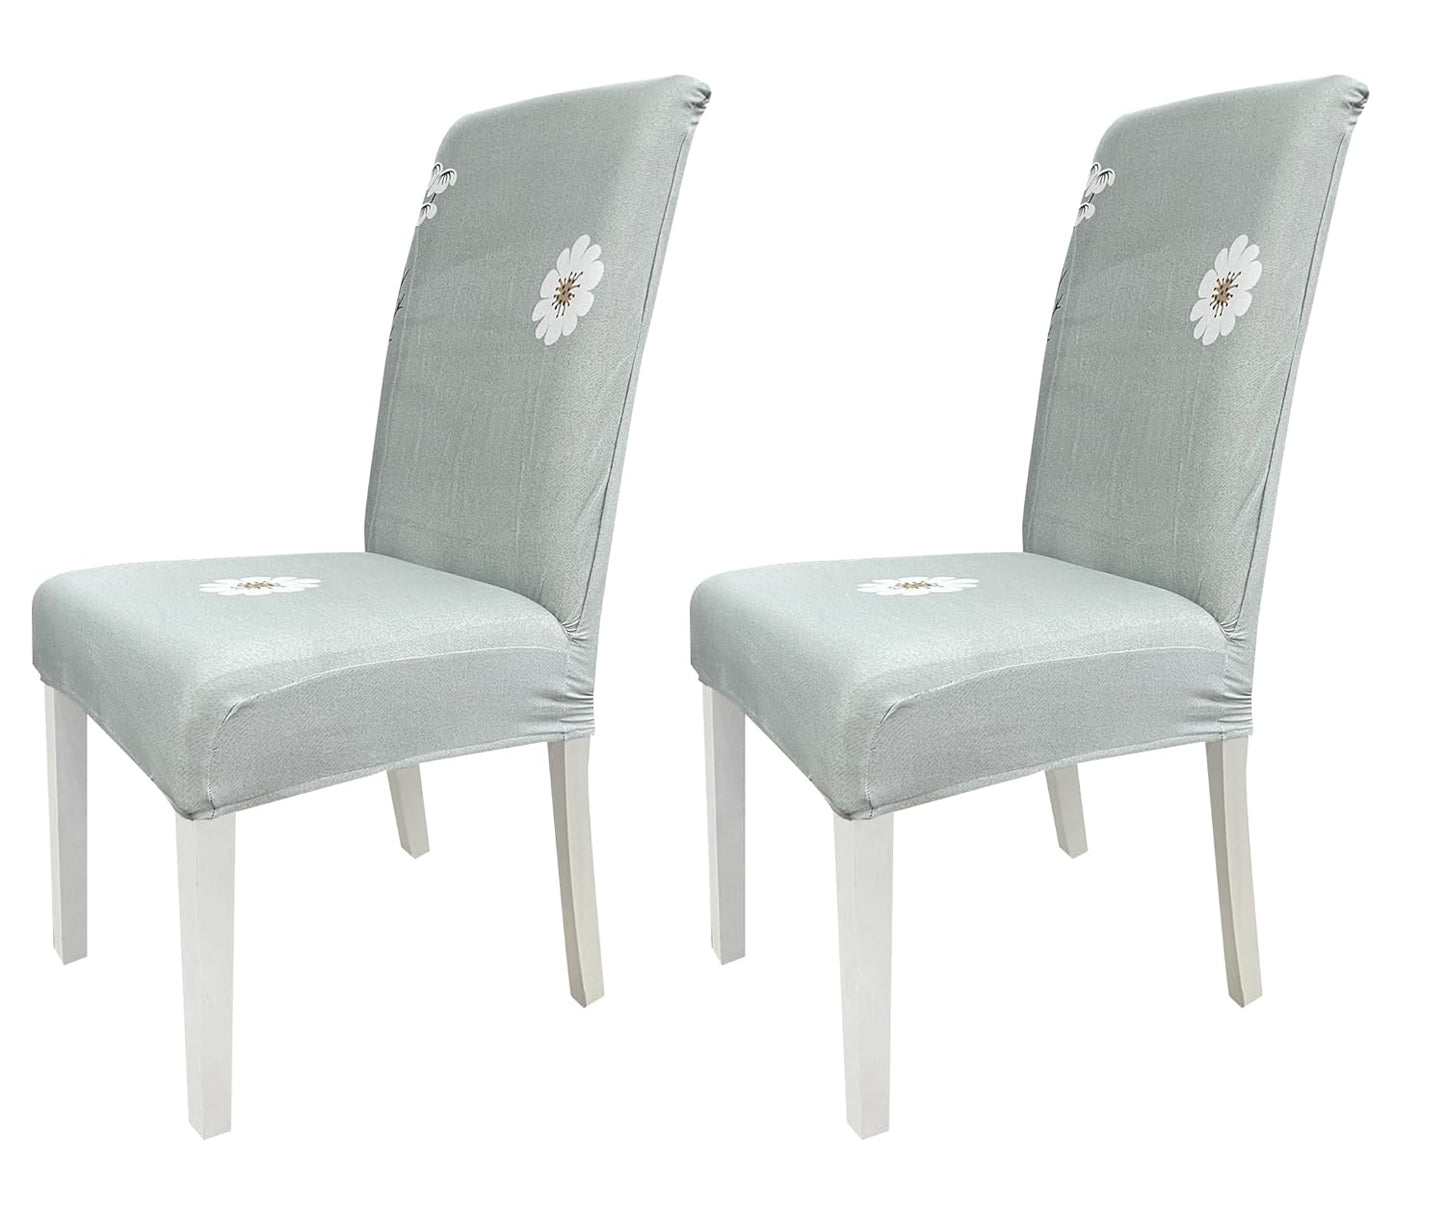 Elastic Chair Cover (Grey Meadow)